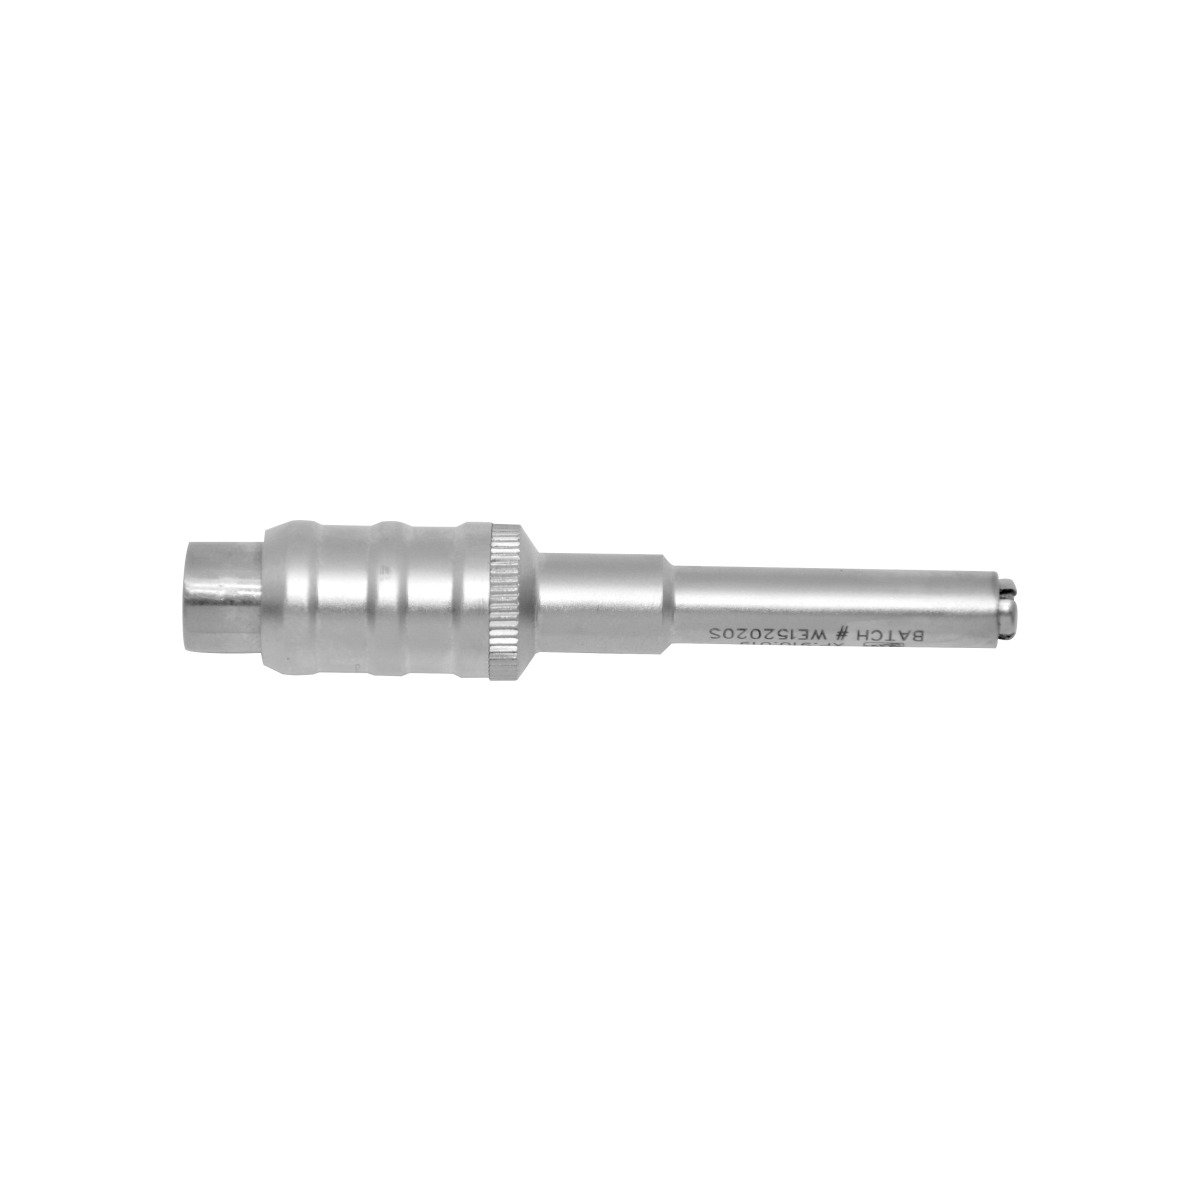 Self-Holding-Sleeve-for-2.7-mm-Cortical-Screws